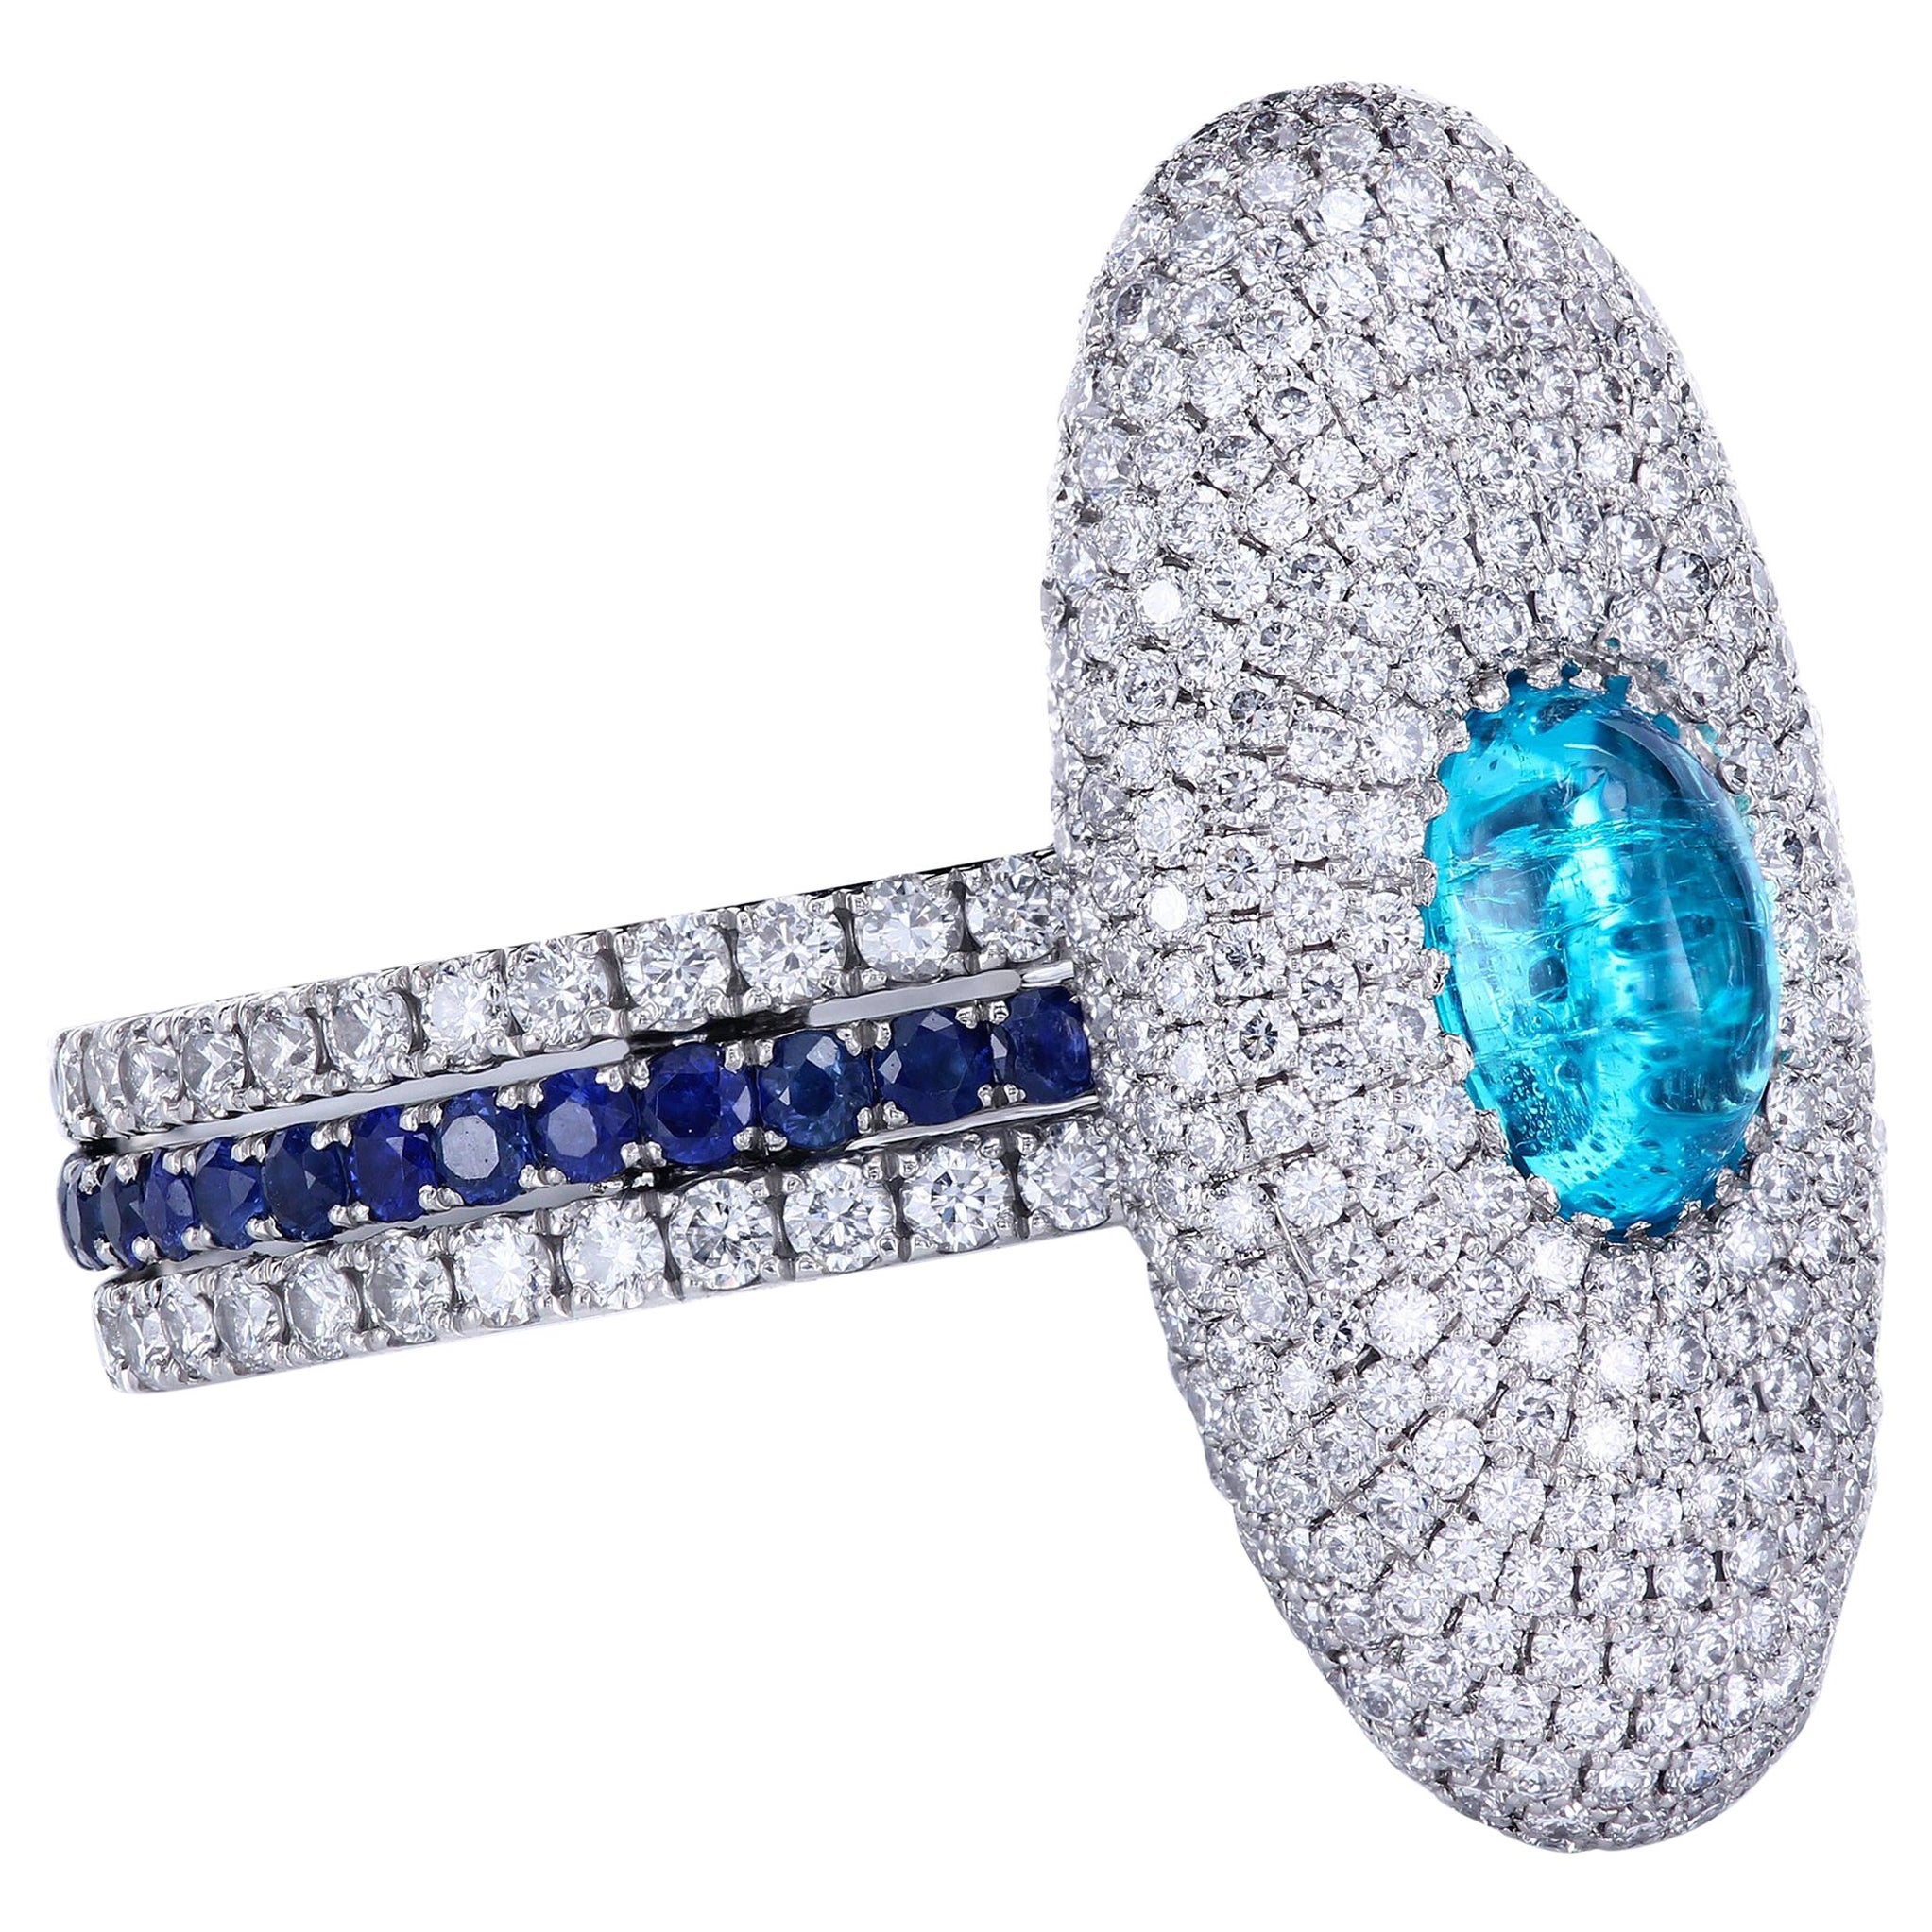 Genuine Brazilian Paraiba Tourmaline in a Micro Pave Statement Ring by Leon Mege